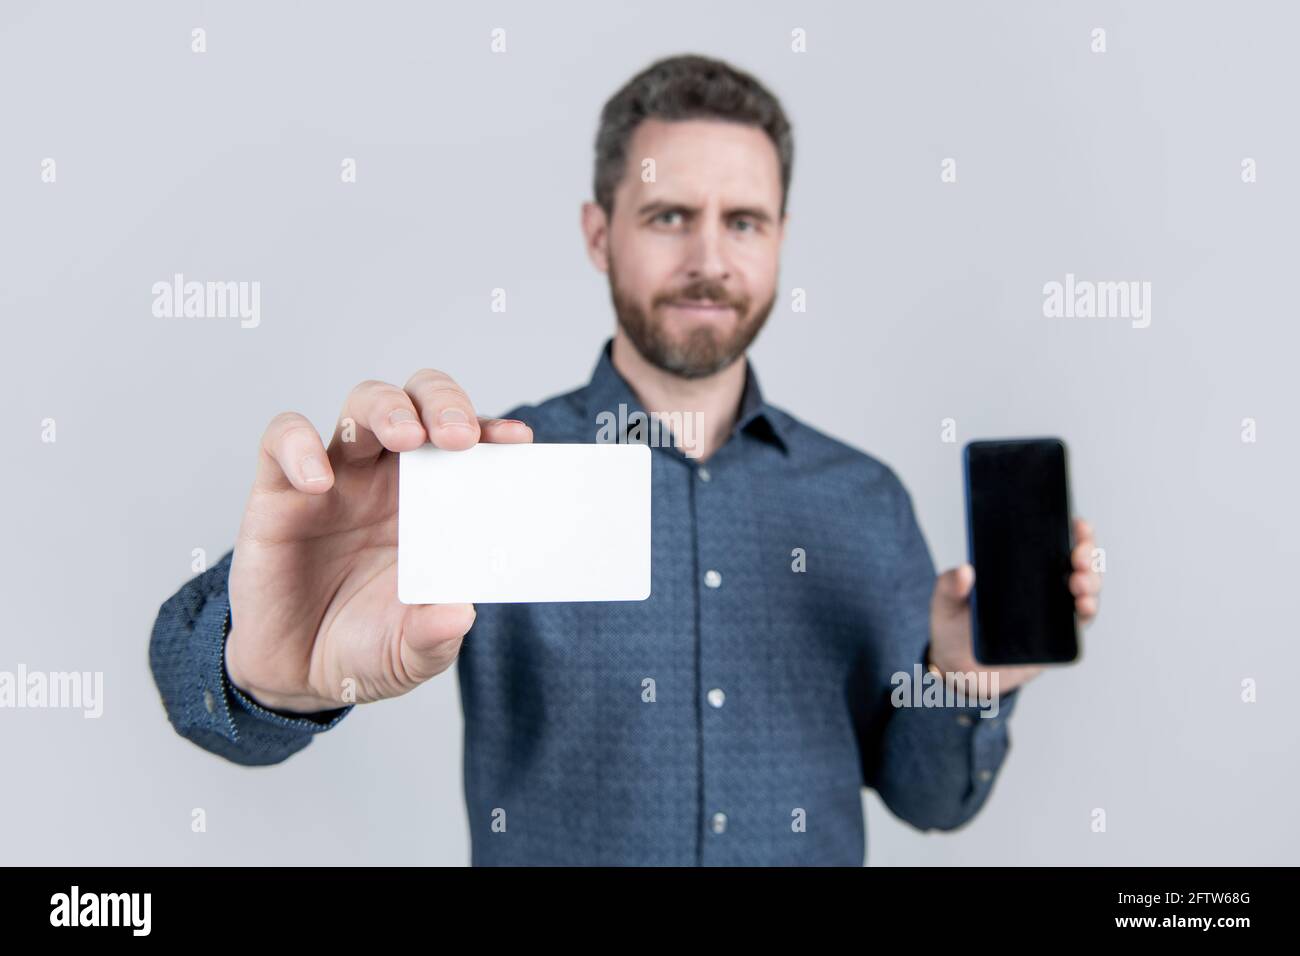 fast phone payment. home shopping. cyber monday. agile business with smartphone. Stock Photo